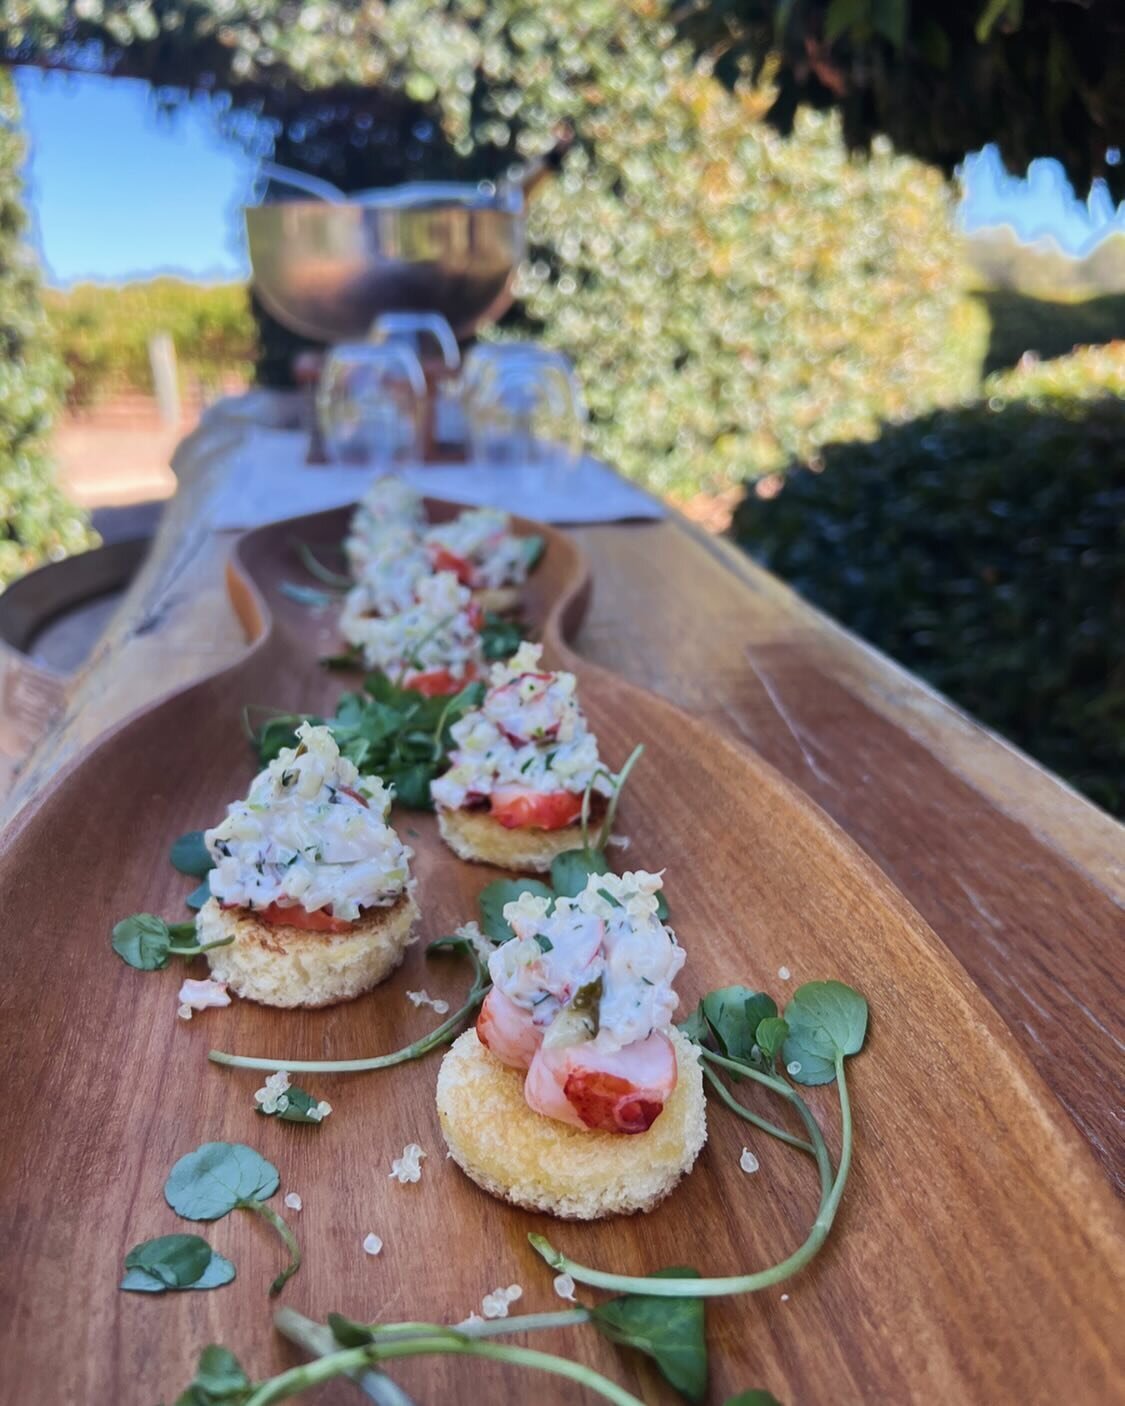 &lsquo;A Taste of Western Australia&rsquo; was the theme of our exclusive cruise tour vineyard lunch yesterday, highlighting the delicious flavours of our region. This amuse-bouche with Marron with a topping of a remoulade was served with @whicherrid